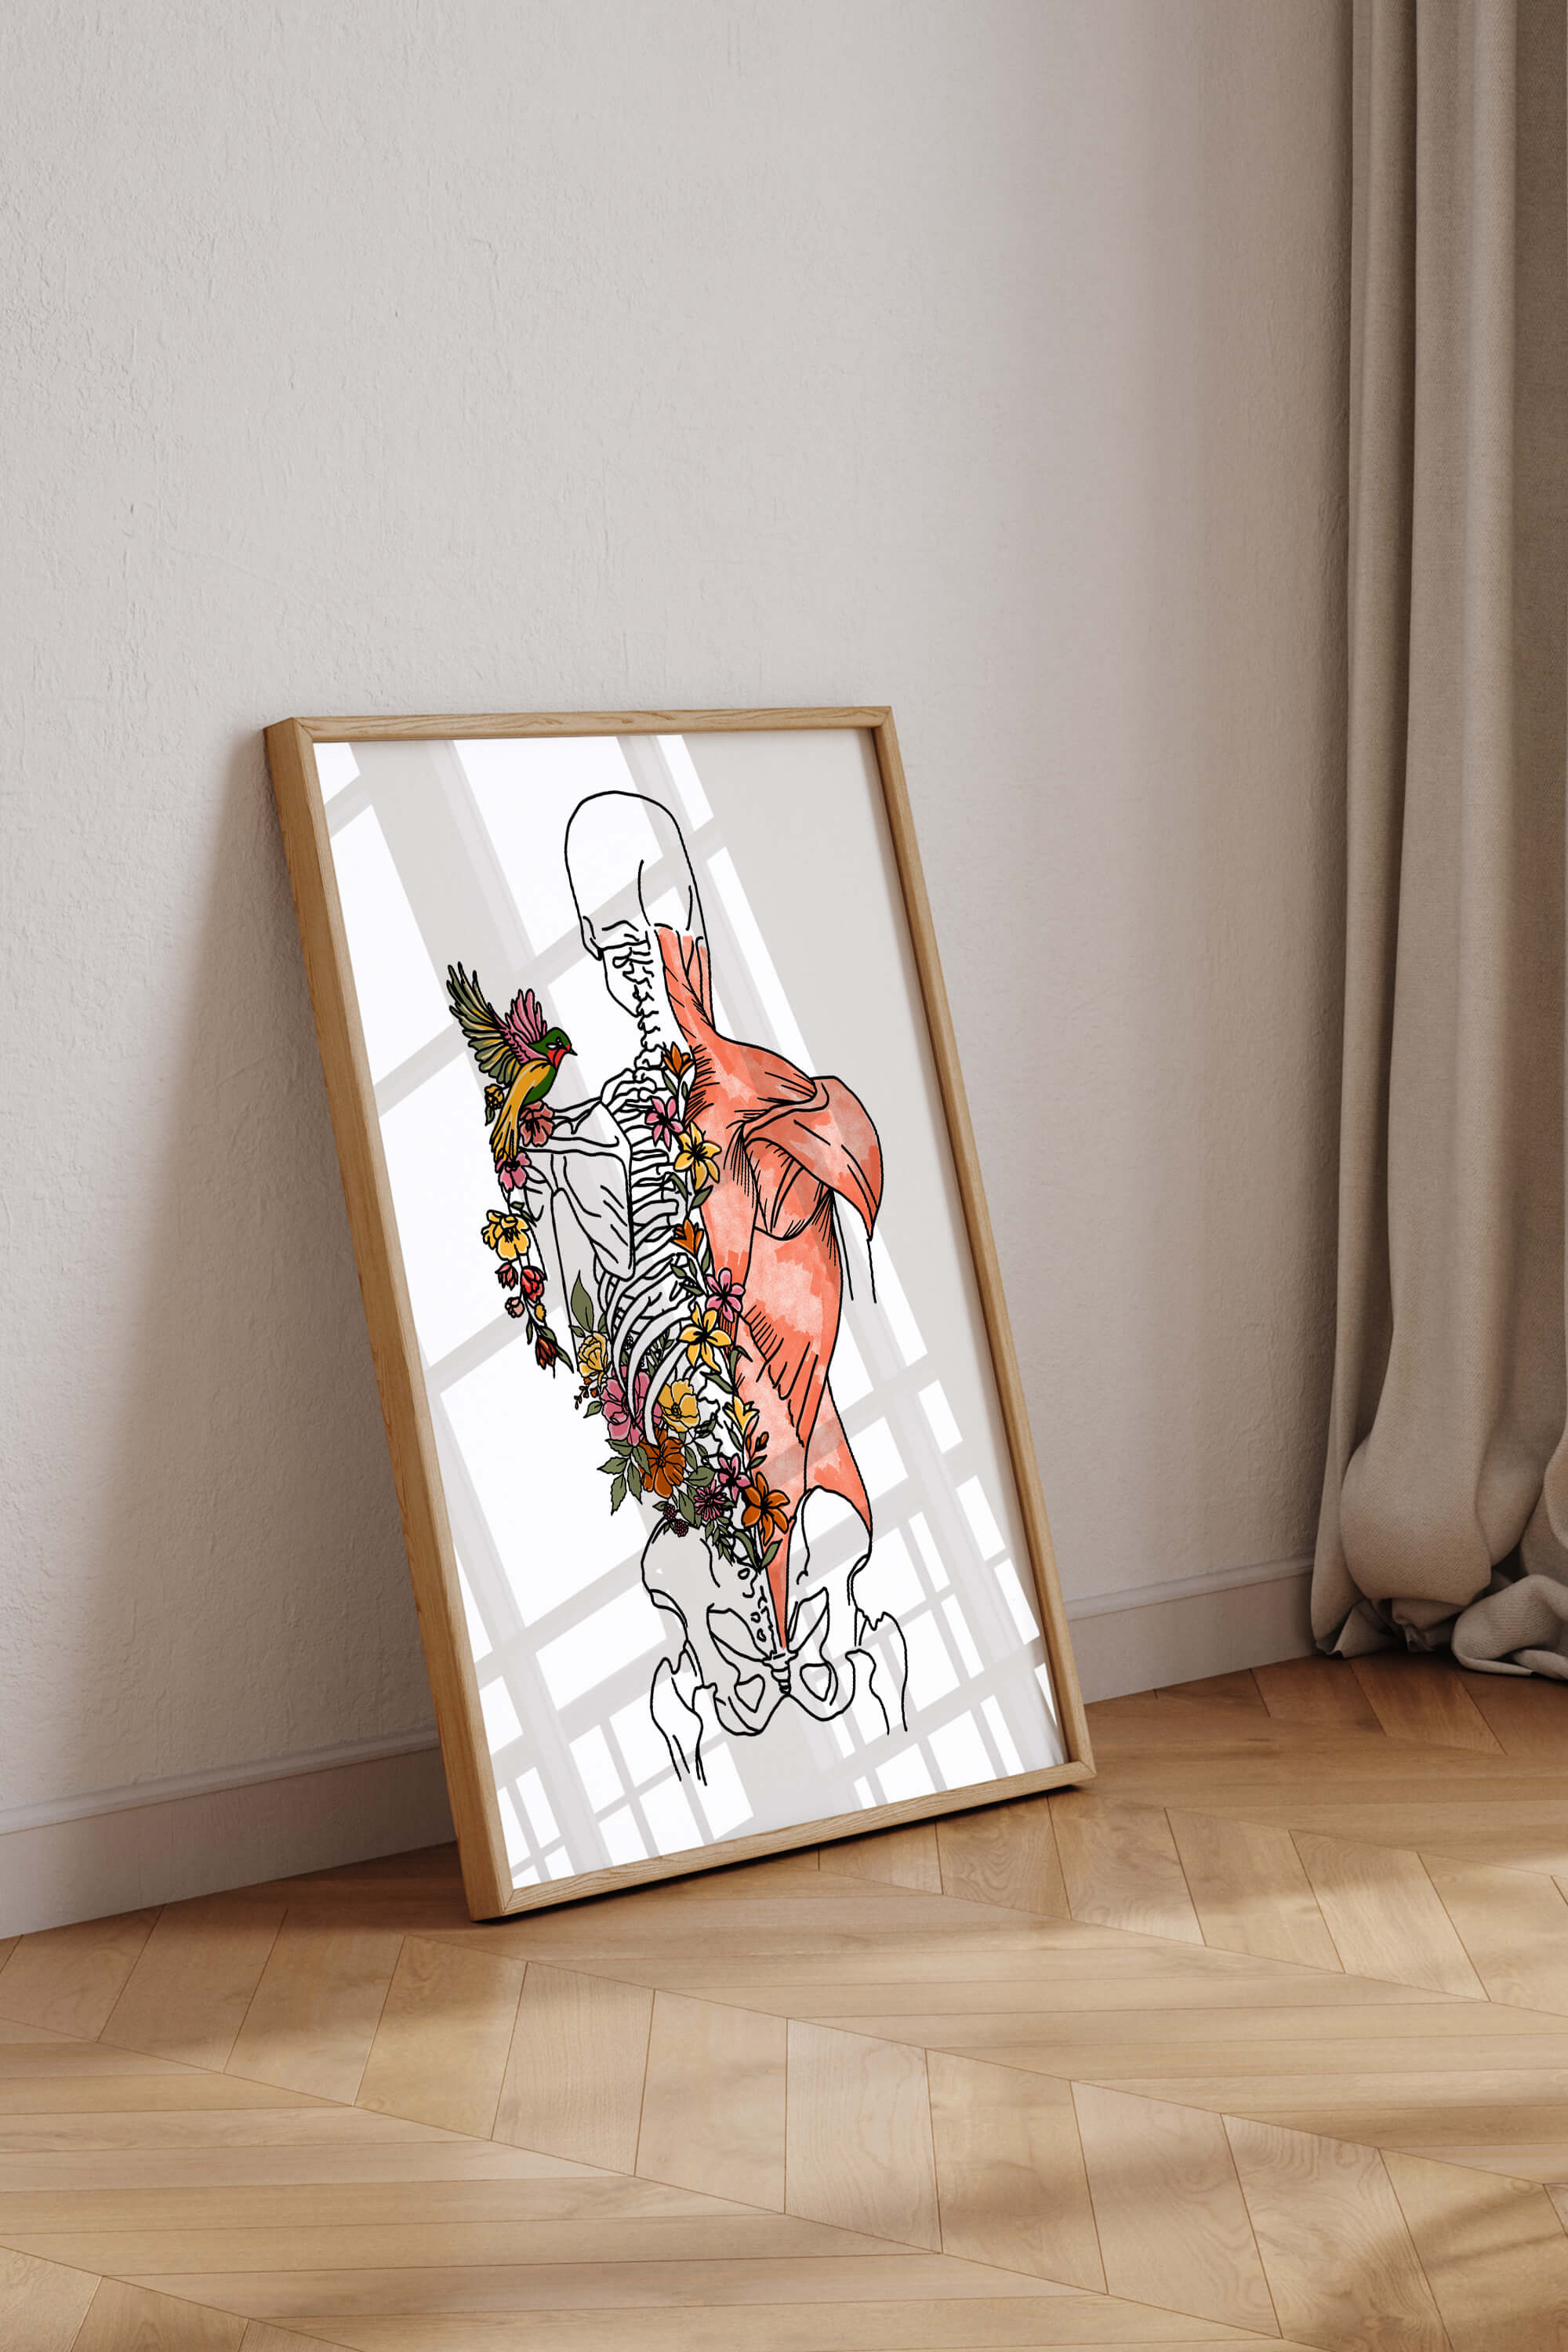 Vibrant Floral Muscle Wall Art, an artistic and educational piece perfect as a gift for chiropractors.